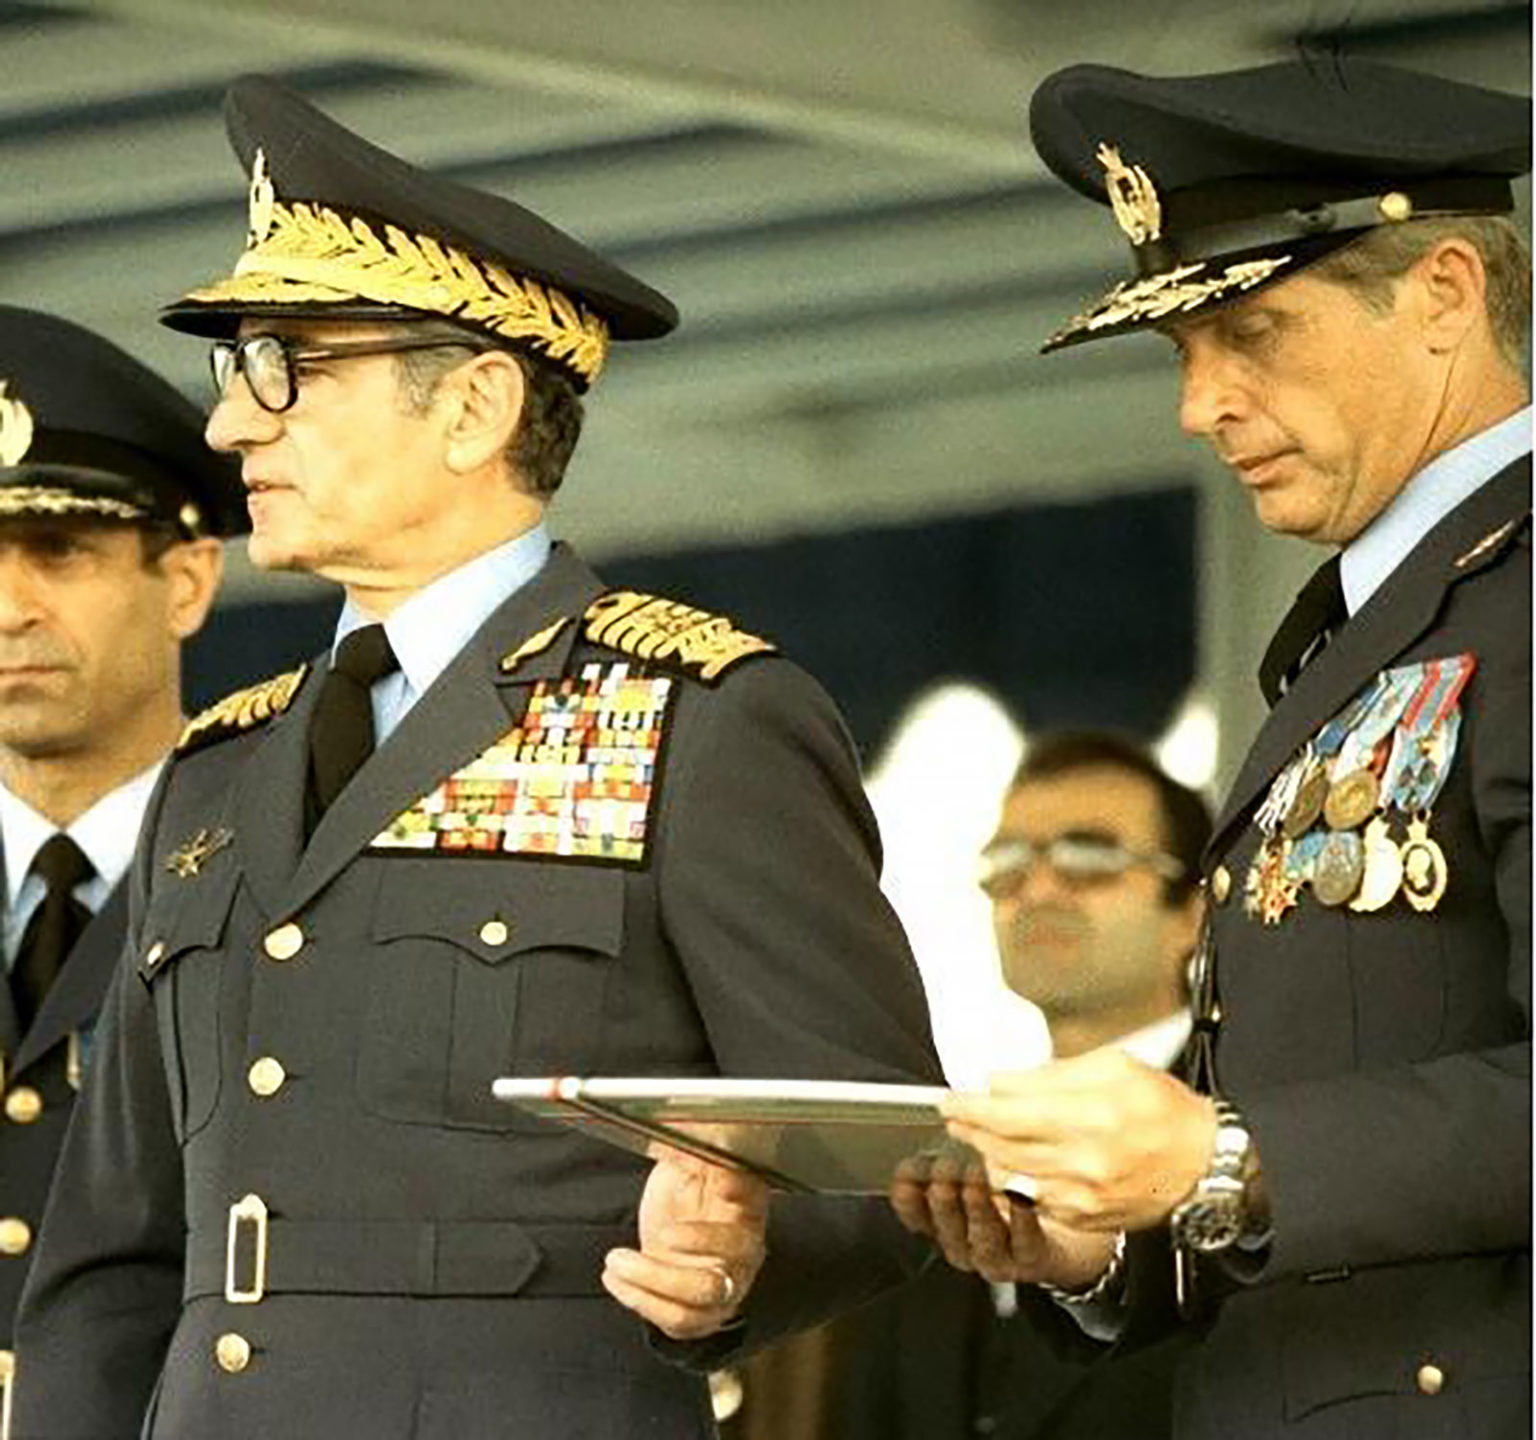 Stories: A Legendary Iranian Pilot and His Rolex GMT-Master | SJX Watches